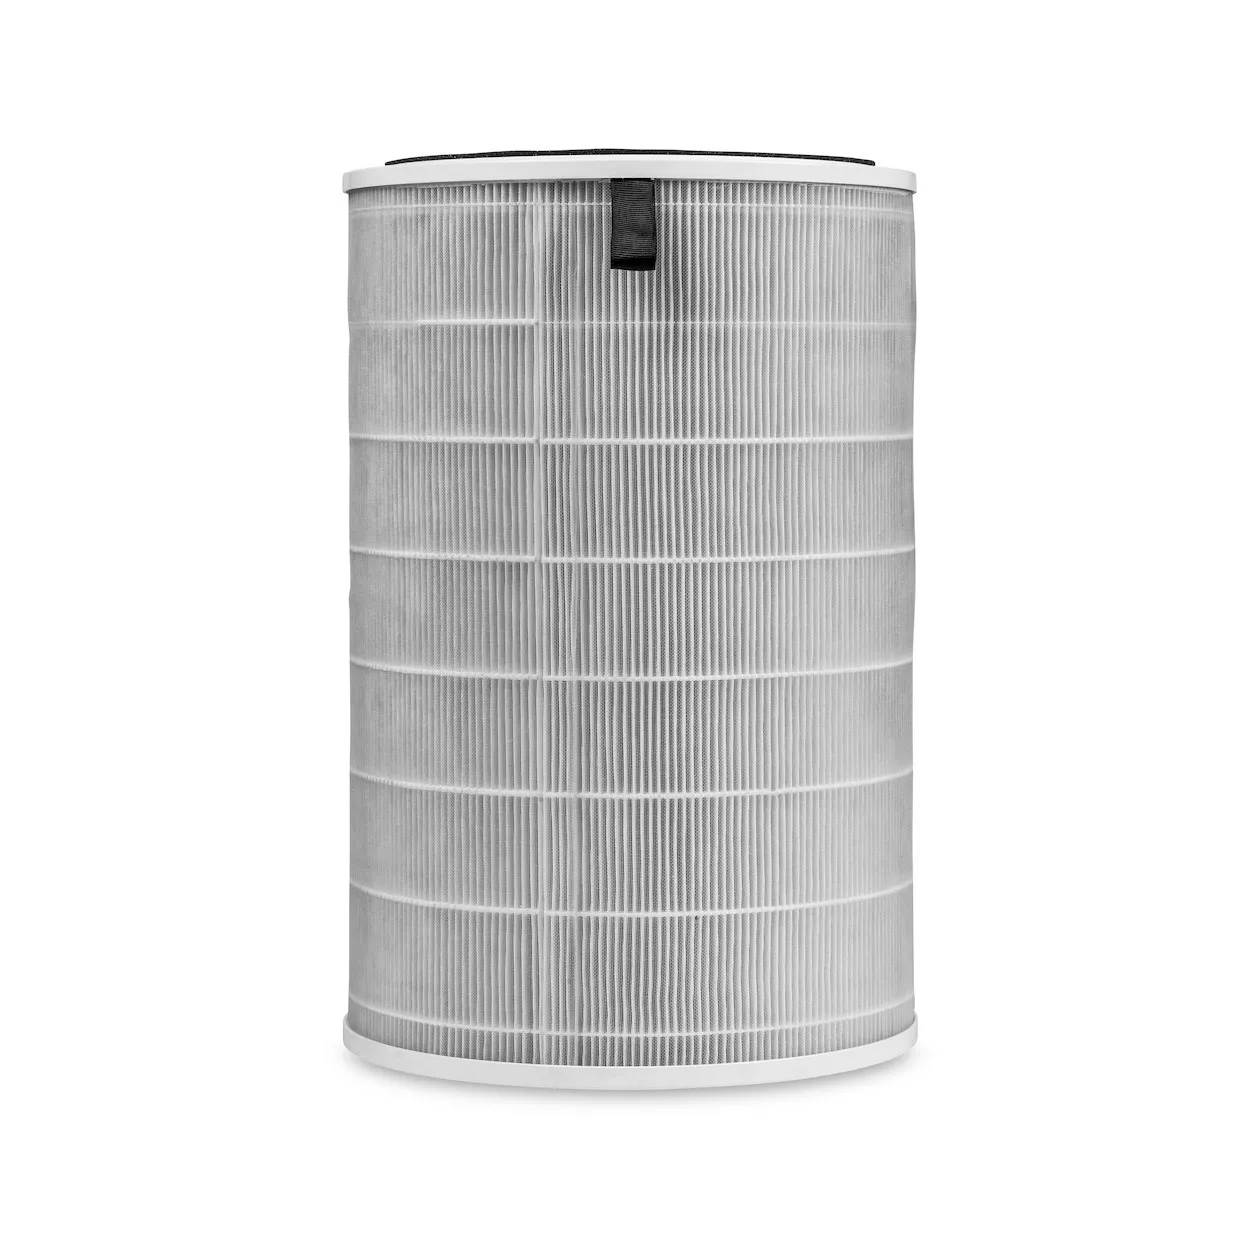 Duux HEPA+Carbon filter for Tube Air Purifier